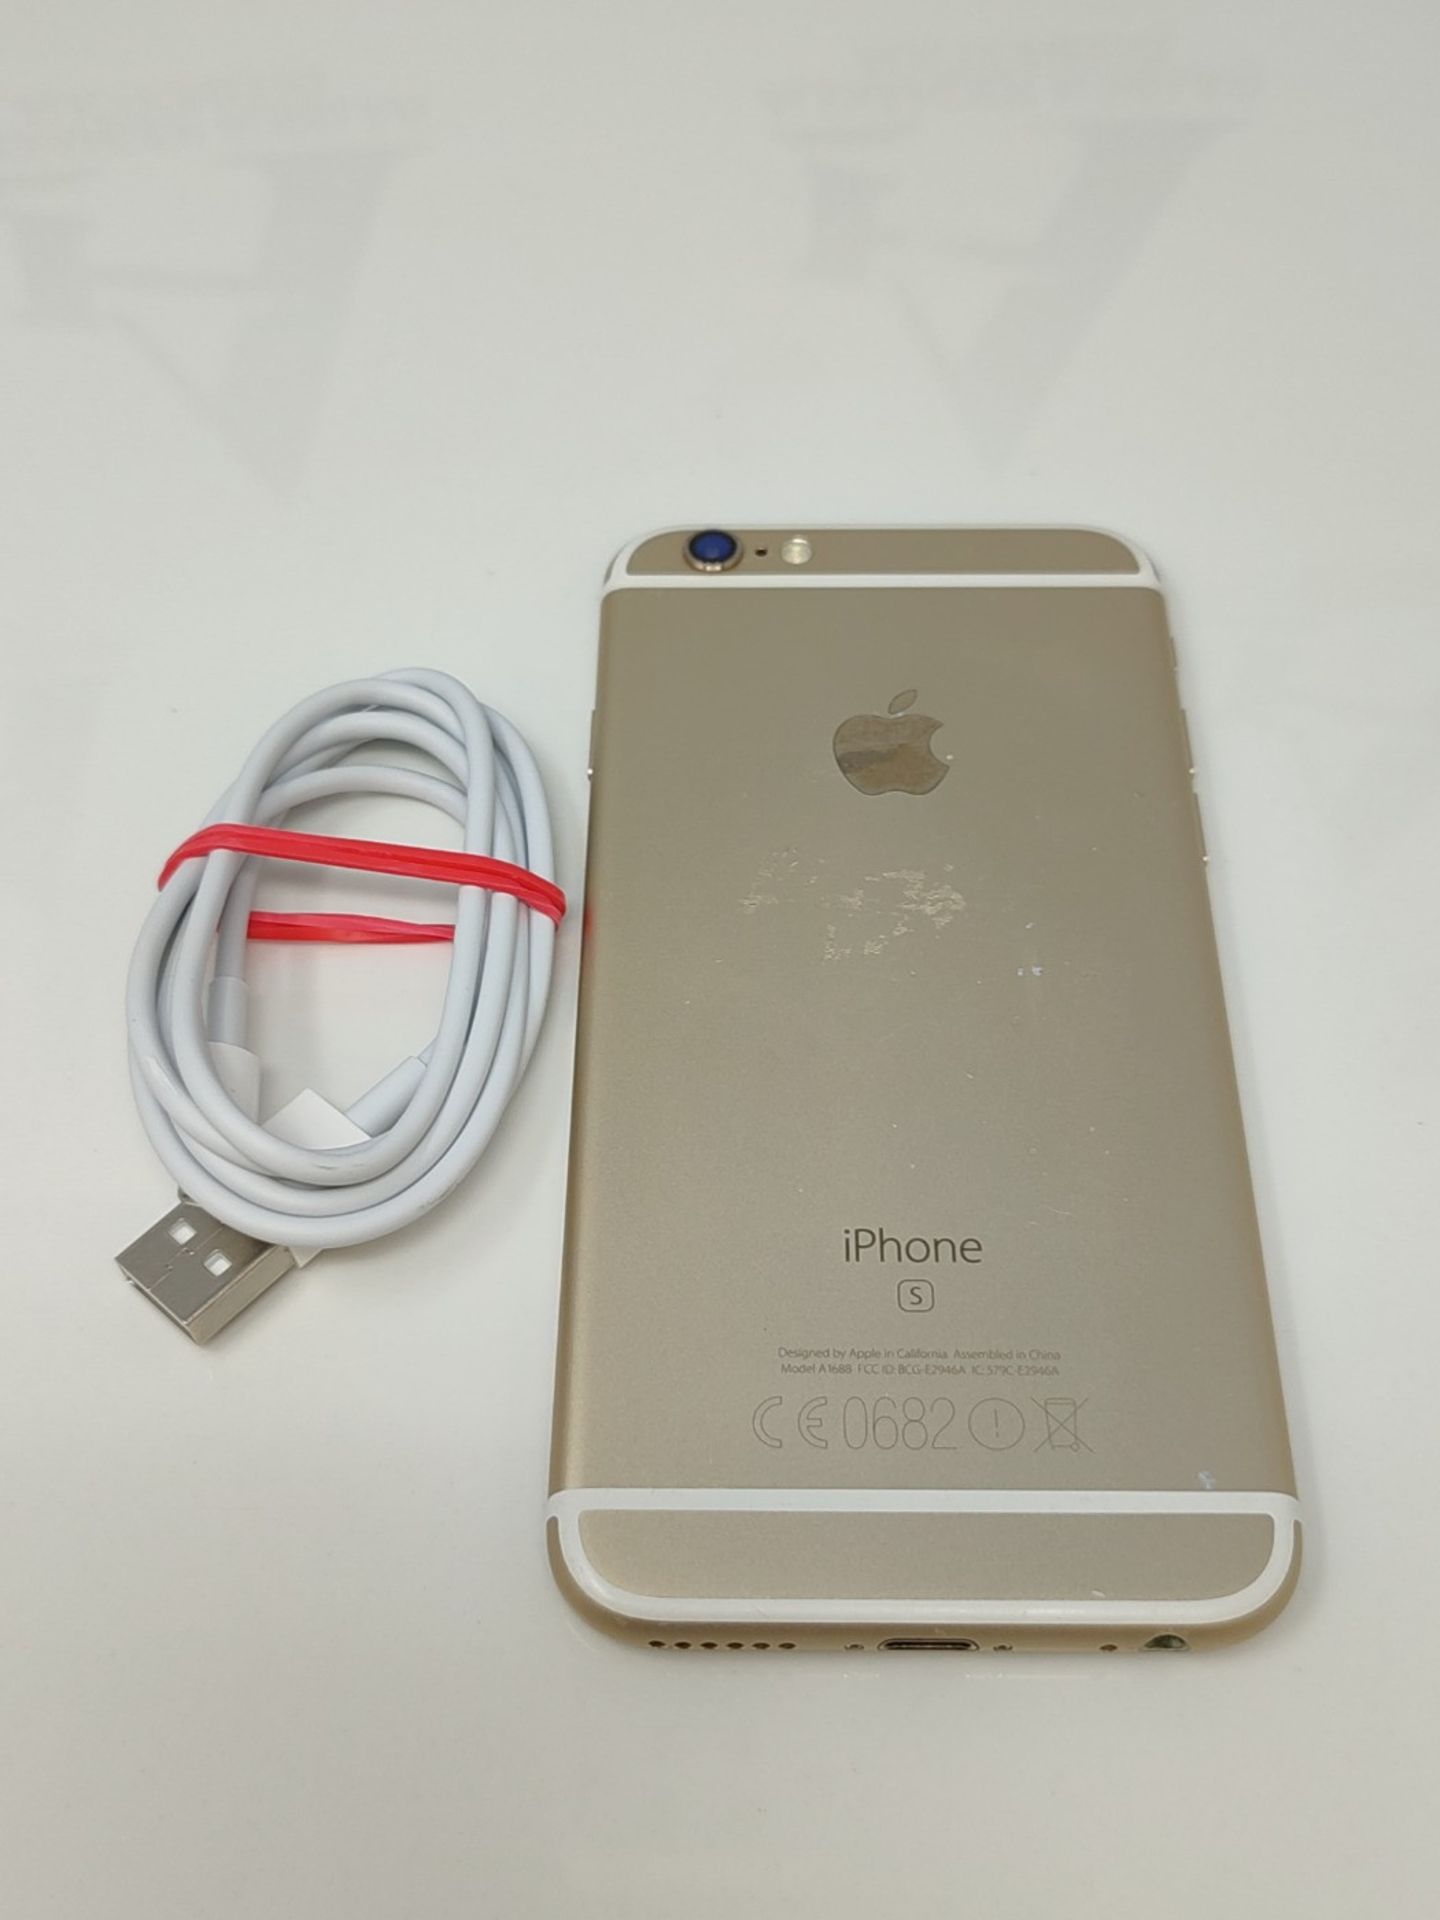 Apple iPhone 6s - 64GB - Rose Gold, A1688 - Image 2 of 2